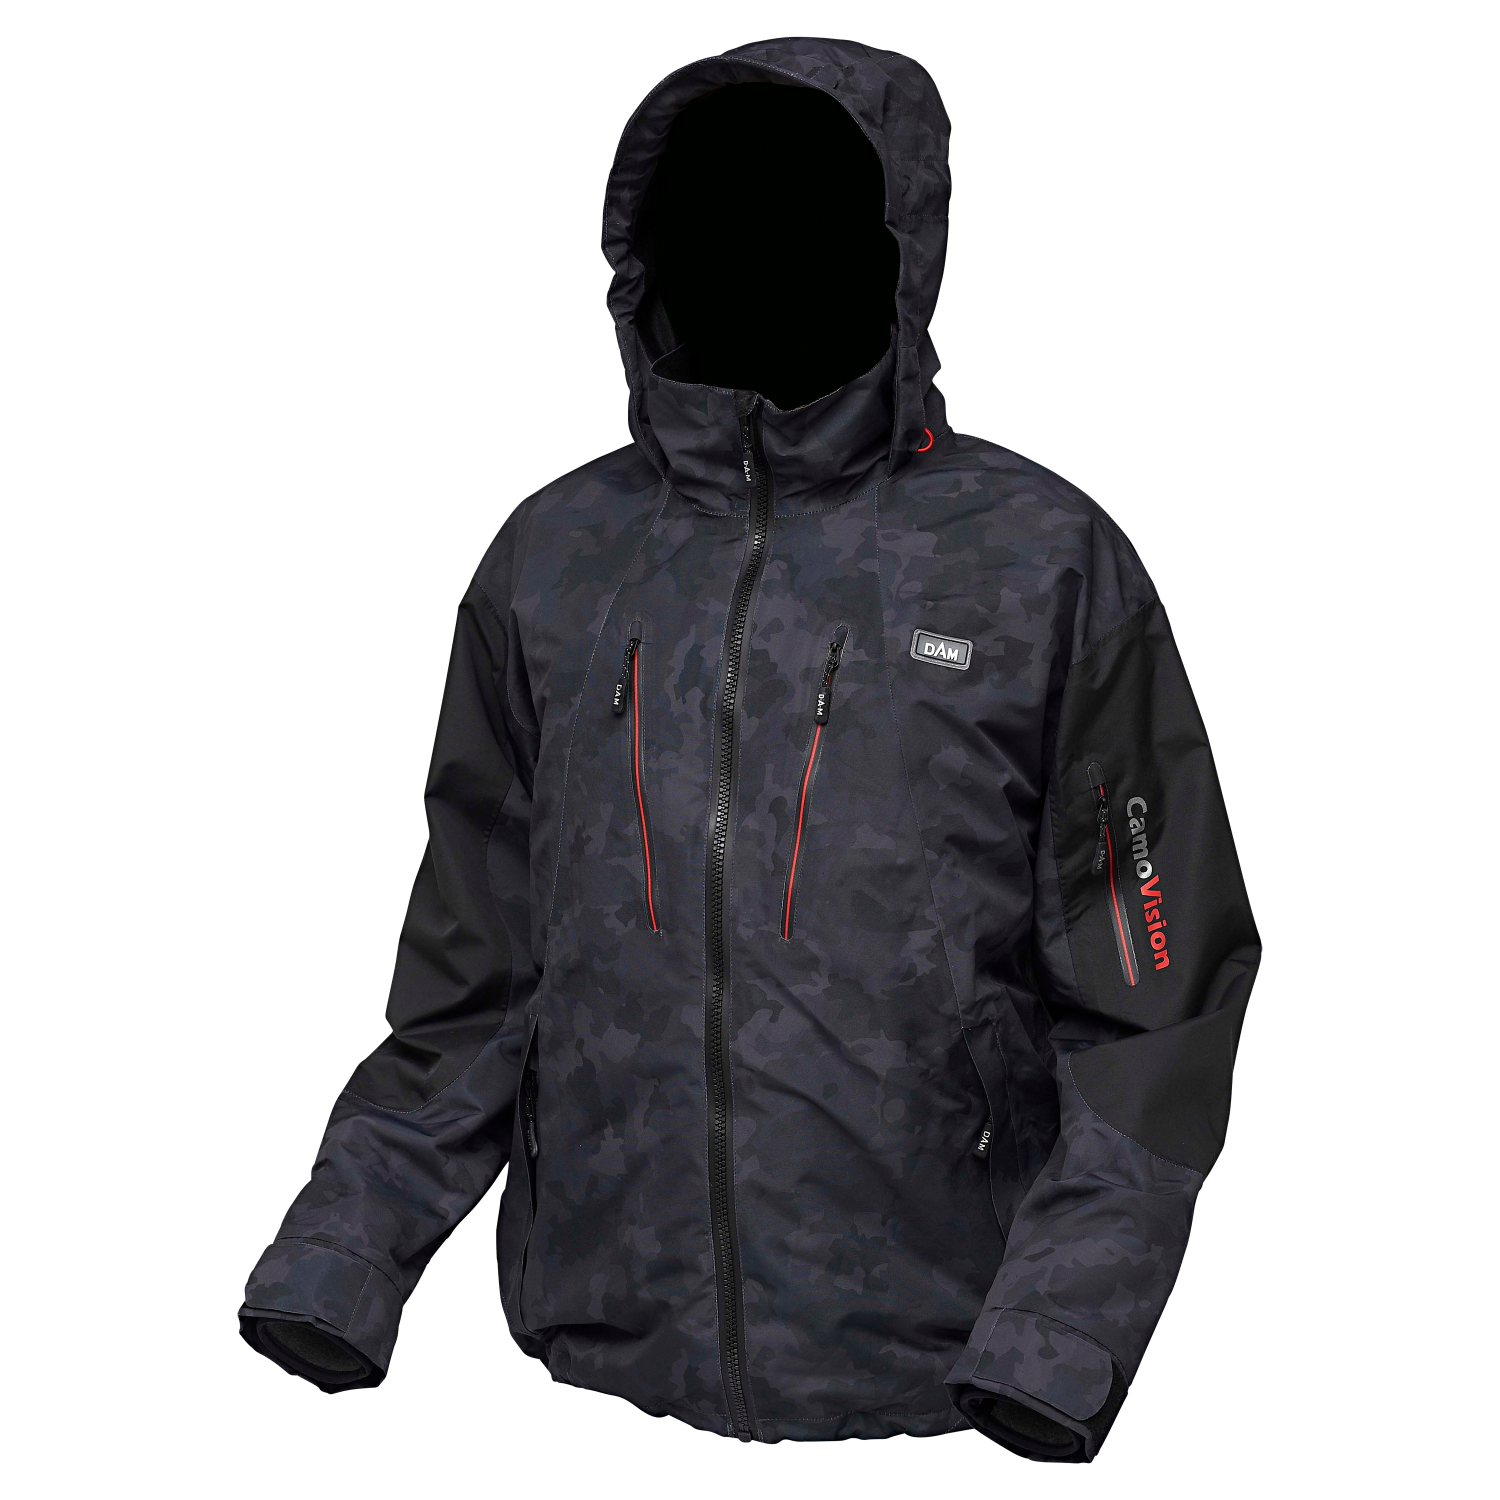 DAM Mens Outdoor Jacket Camovision Jacket at low prices